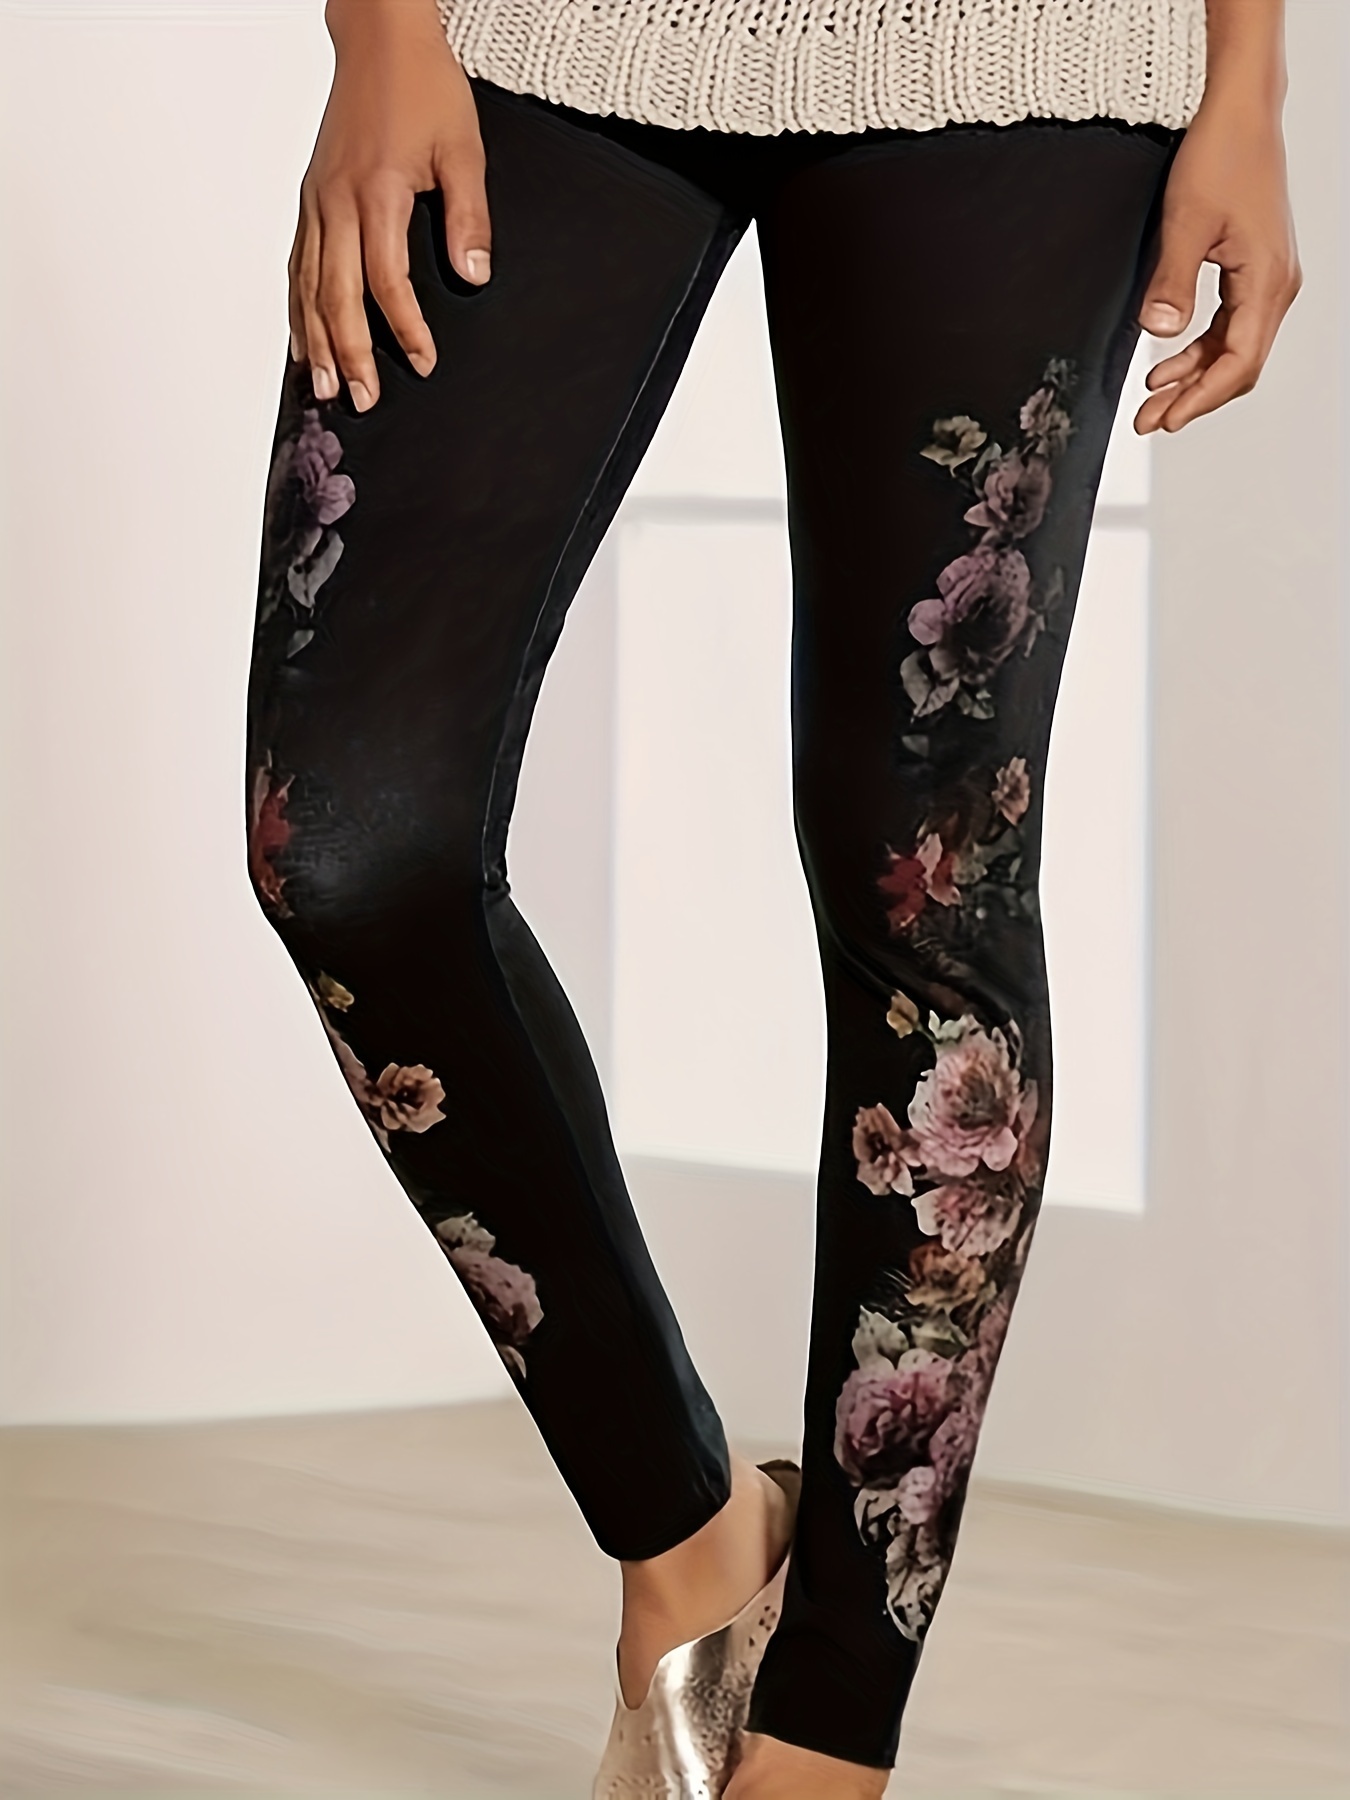 Plus Size Sheer Floral Print Lace Leggings For Women Elegant Hollow Out  Lace Trousers In L 3XL Sizes 210522 From Cong03, $5.96